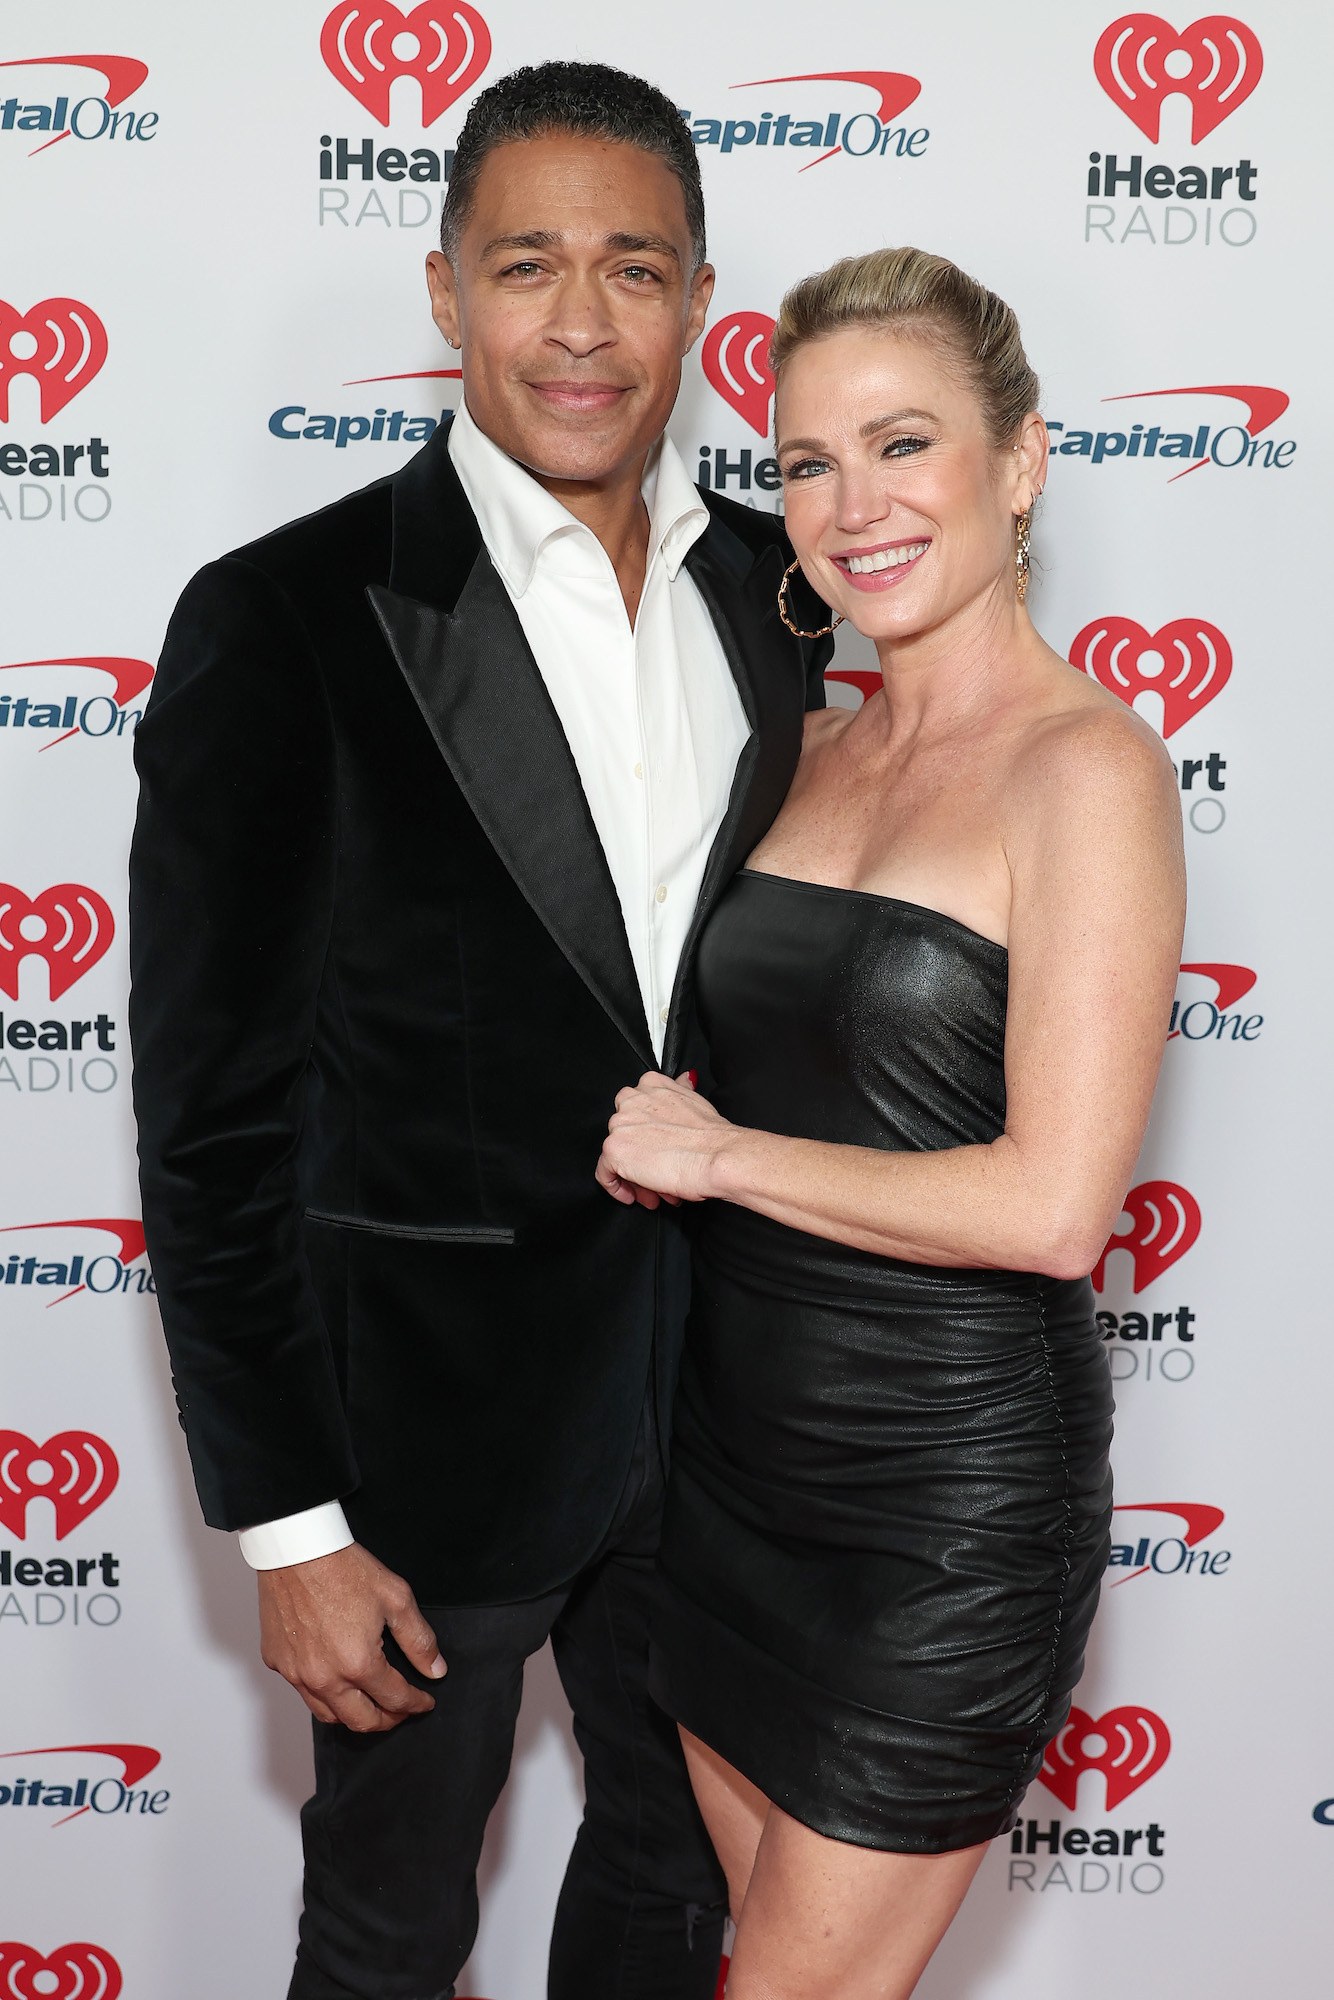 T J Holmes Sometimes Asks Amy Robach If She Wants to Date Other People